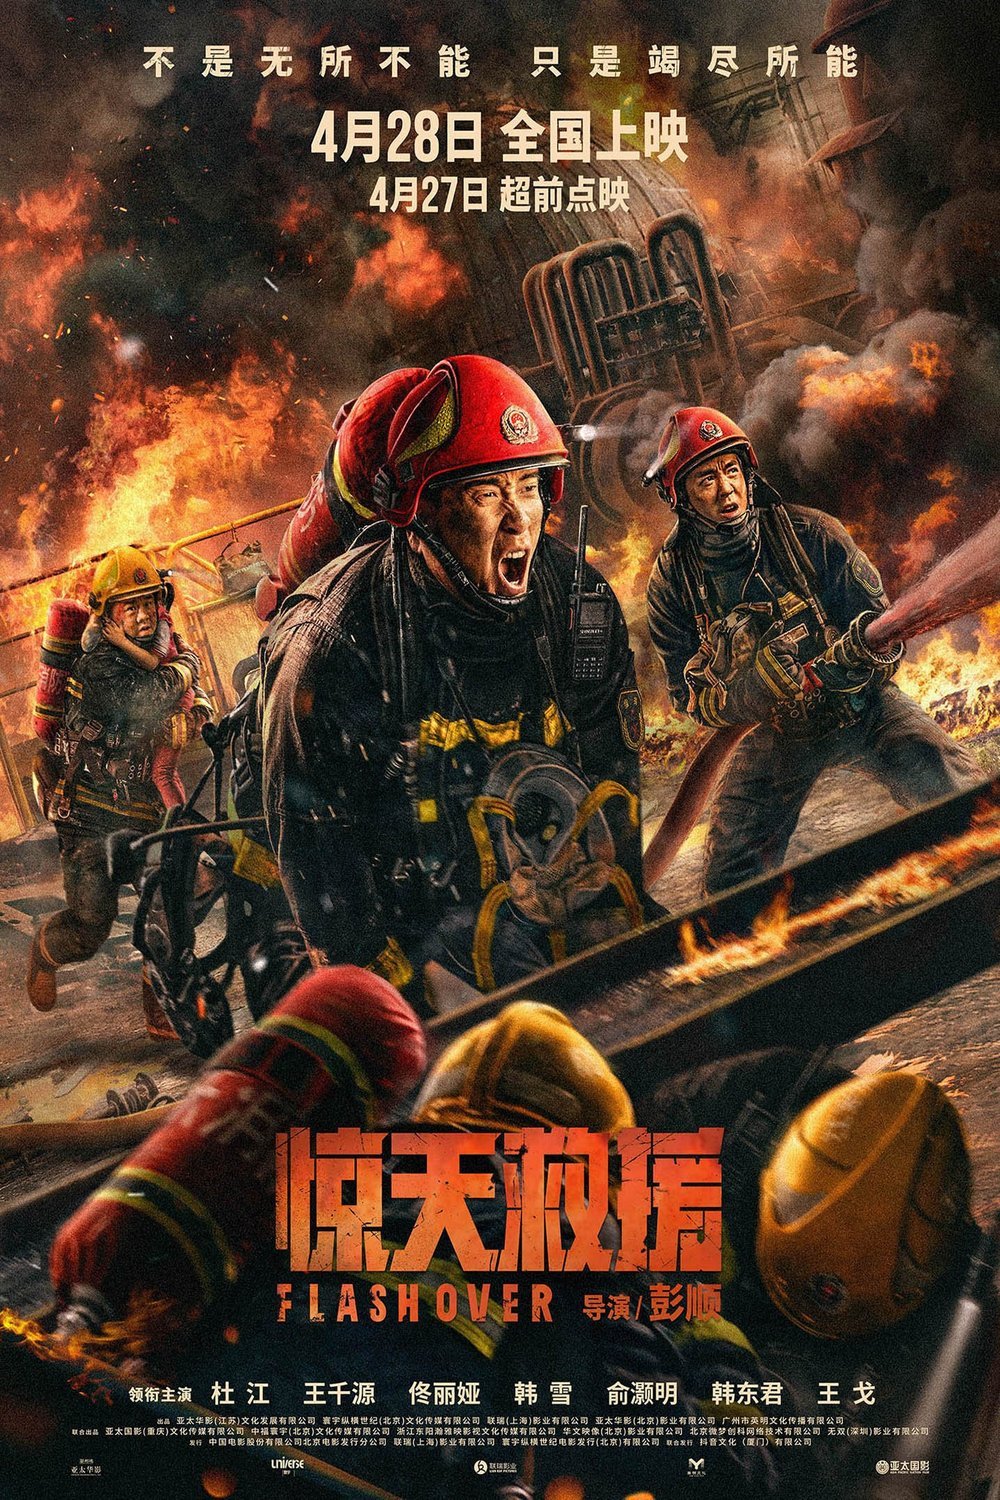 Mandarin poster of the movie Flash Over